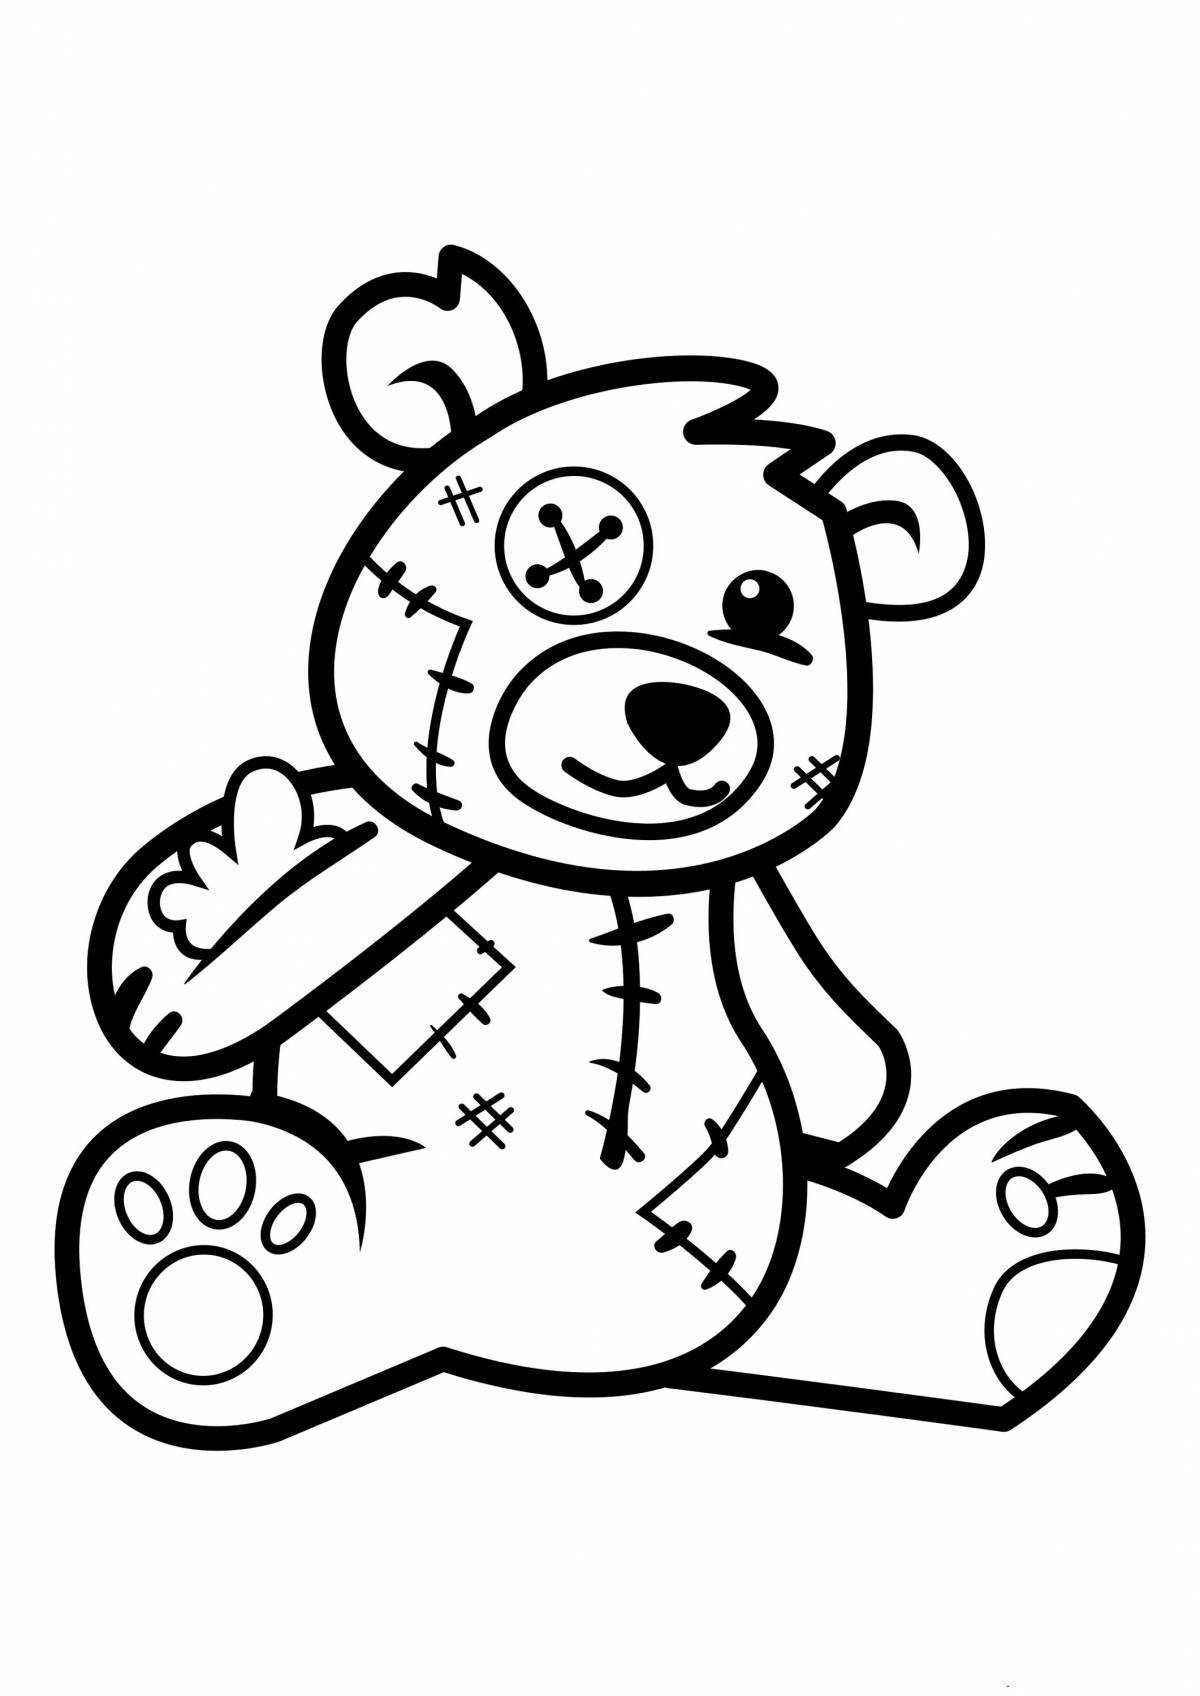 Sweet super bear coloring page